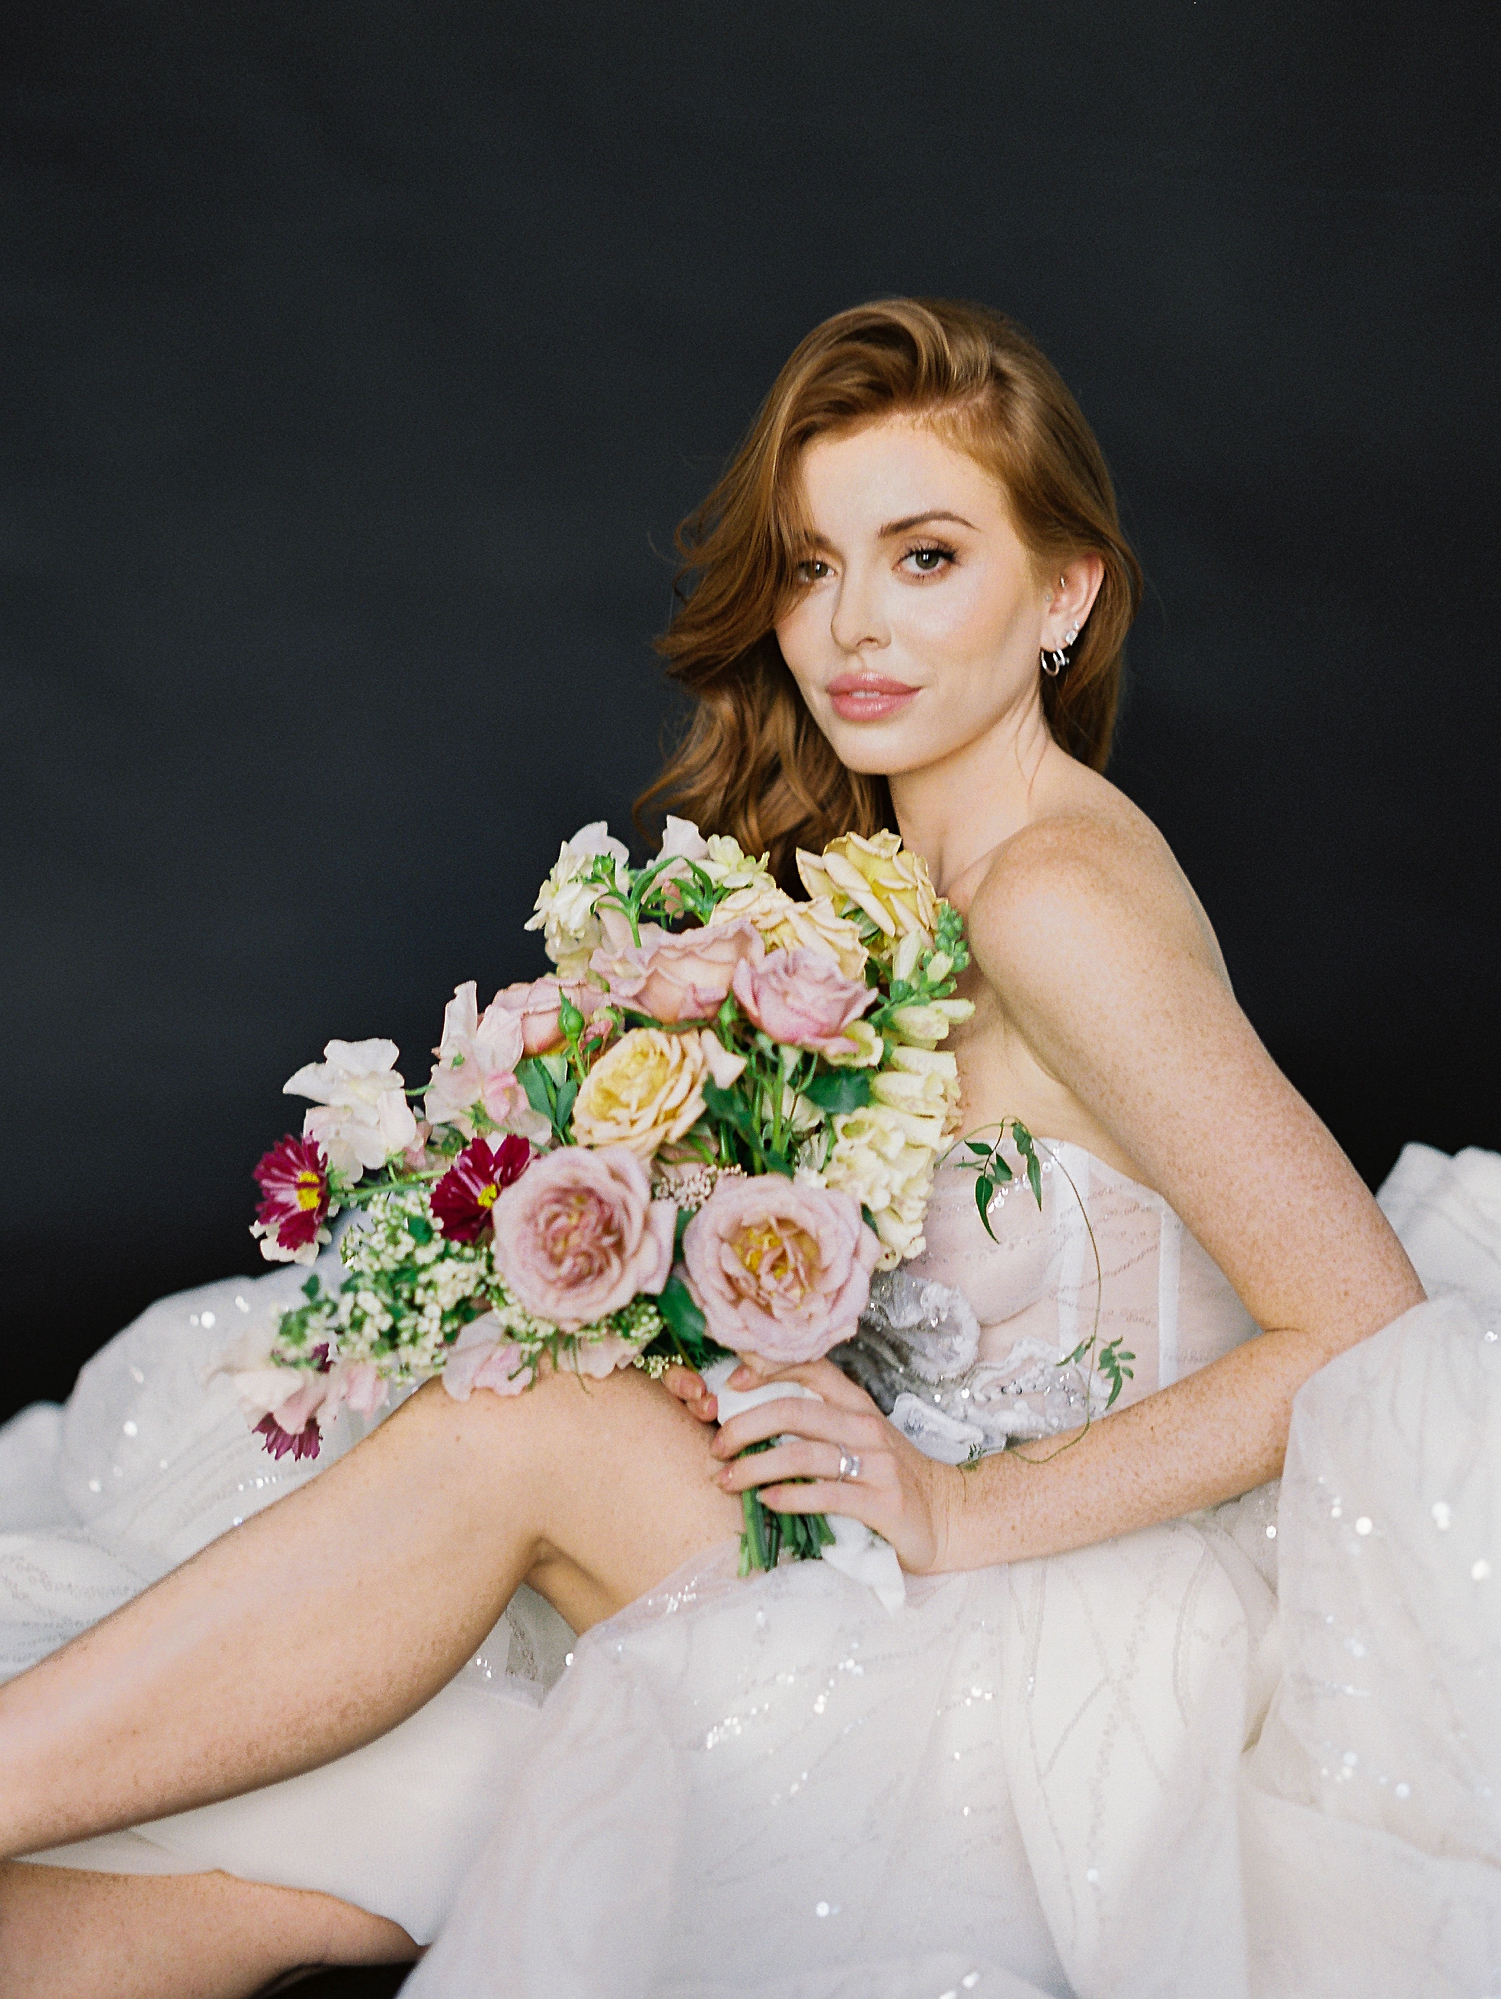 red headed girl in sparkling white wedding gown sitting with colorful floral bouquet